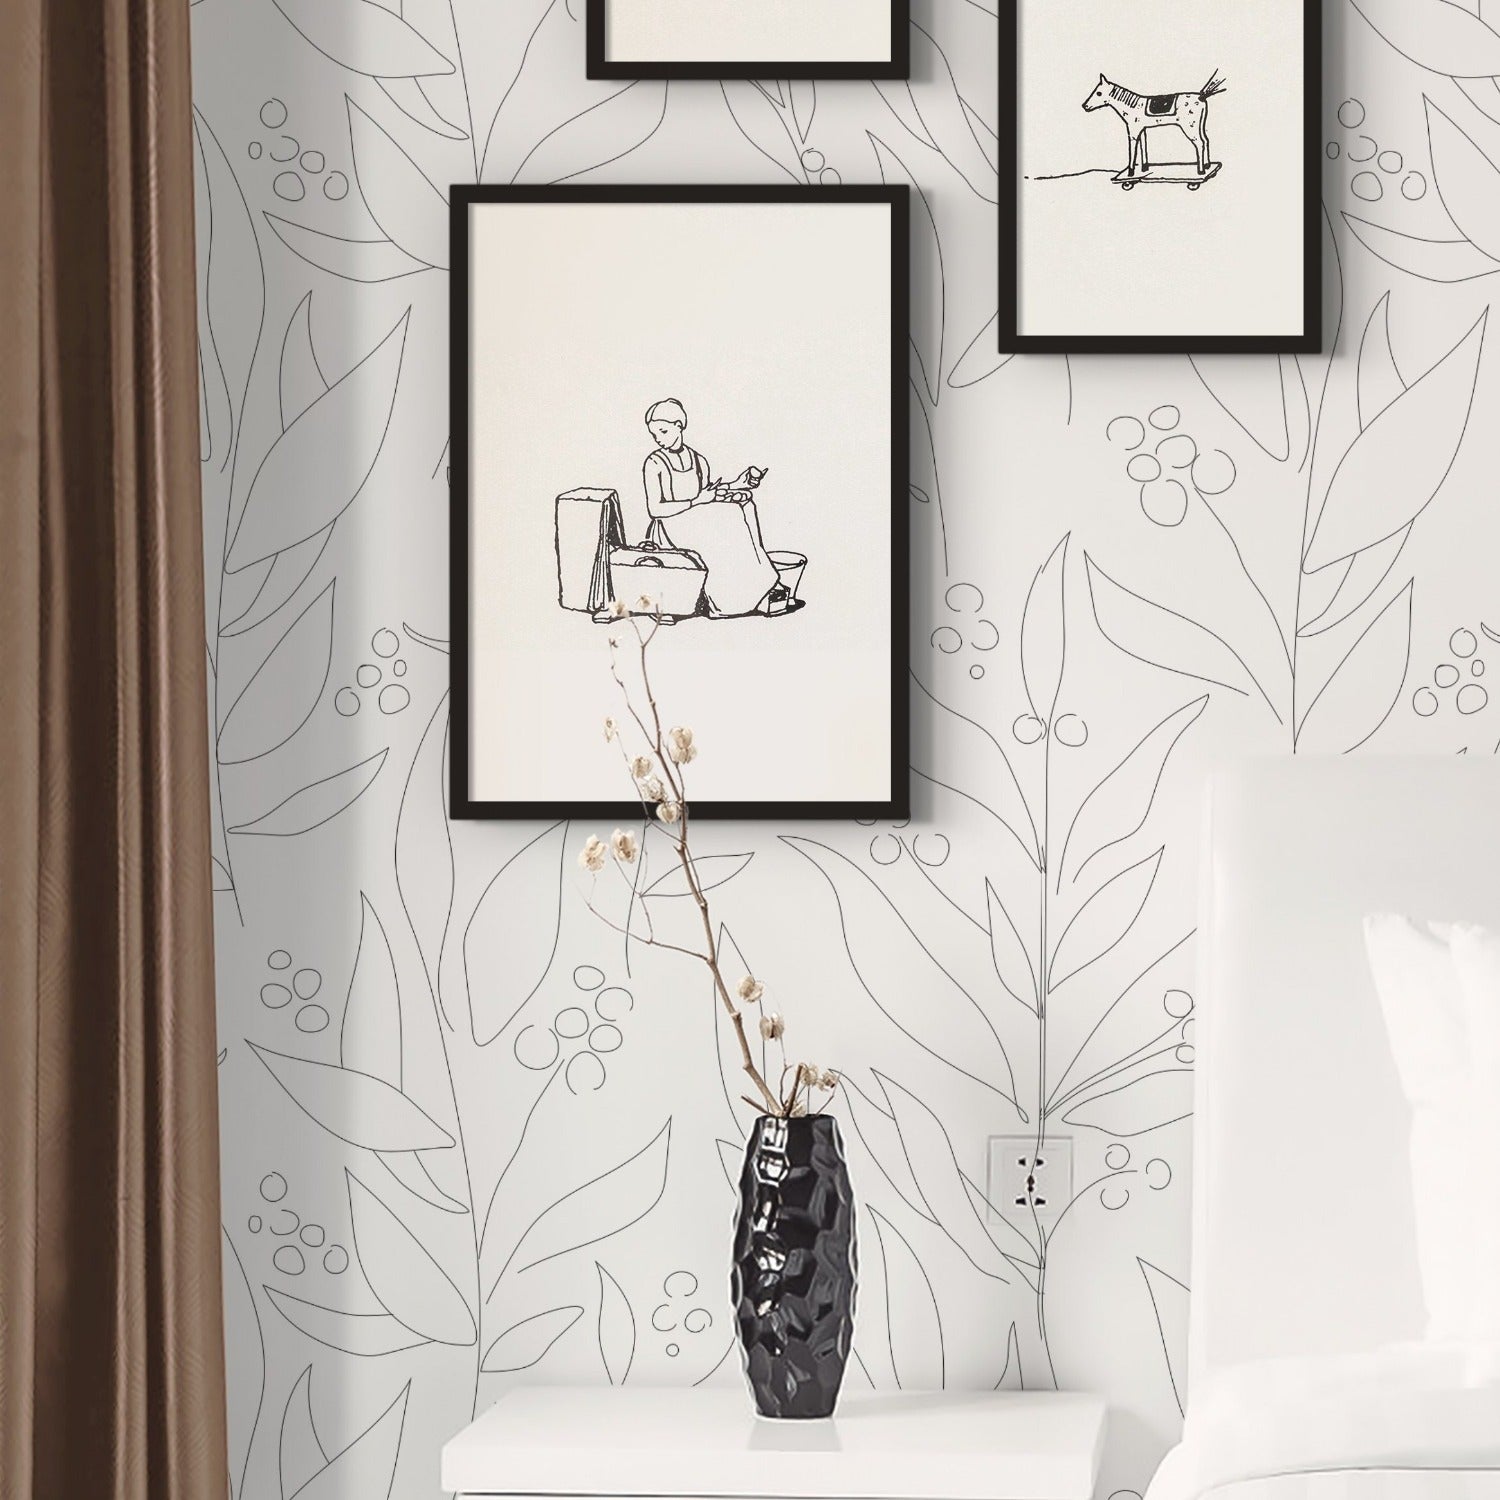 A stylish bedroom featuring a white nightstand, a black vase with flowers, and framed sketches on the wall. The wall is covered with white wallpaper displaying an abstract black floral pattern, creating a serene and modern look.